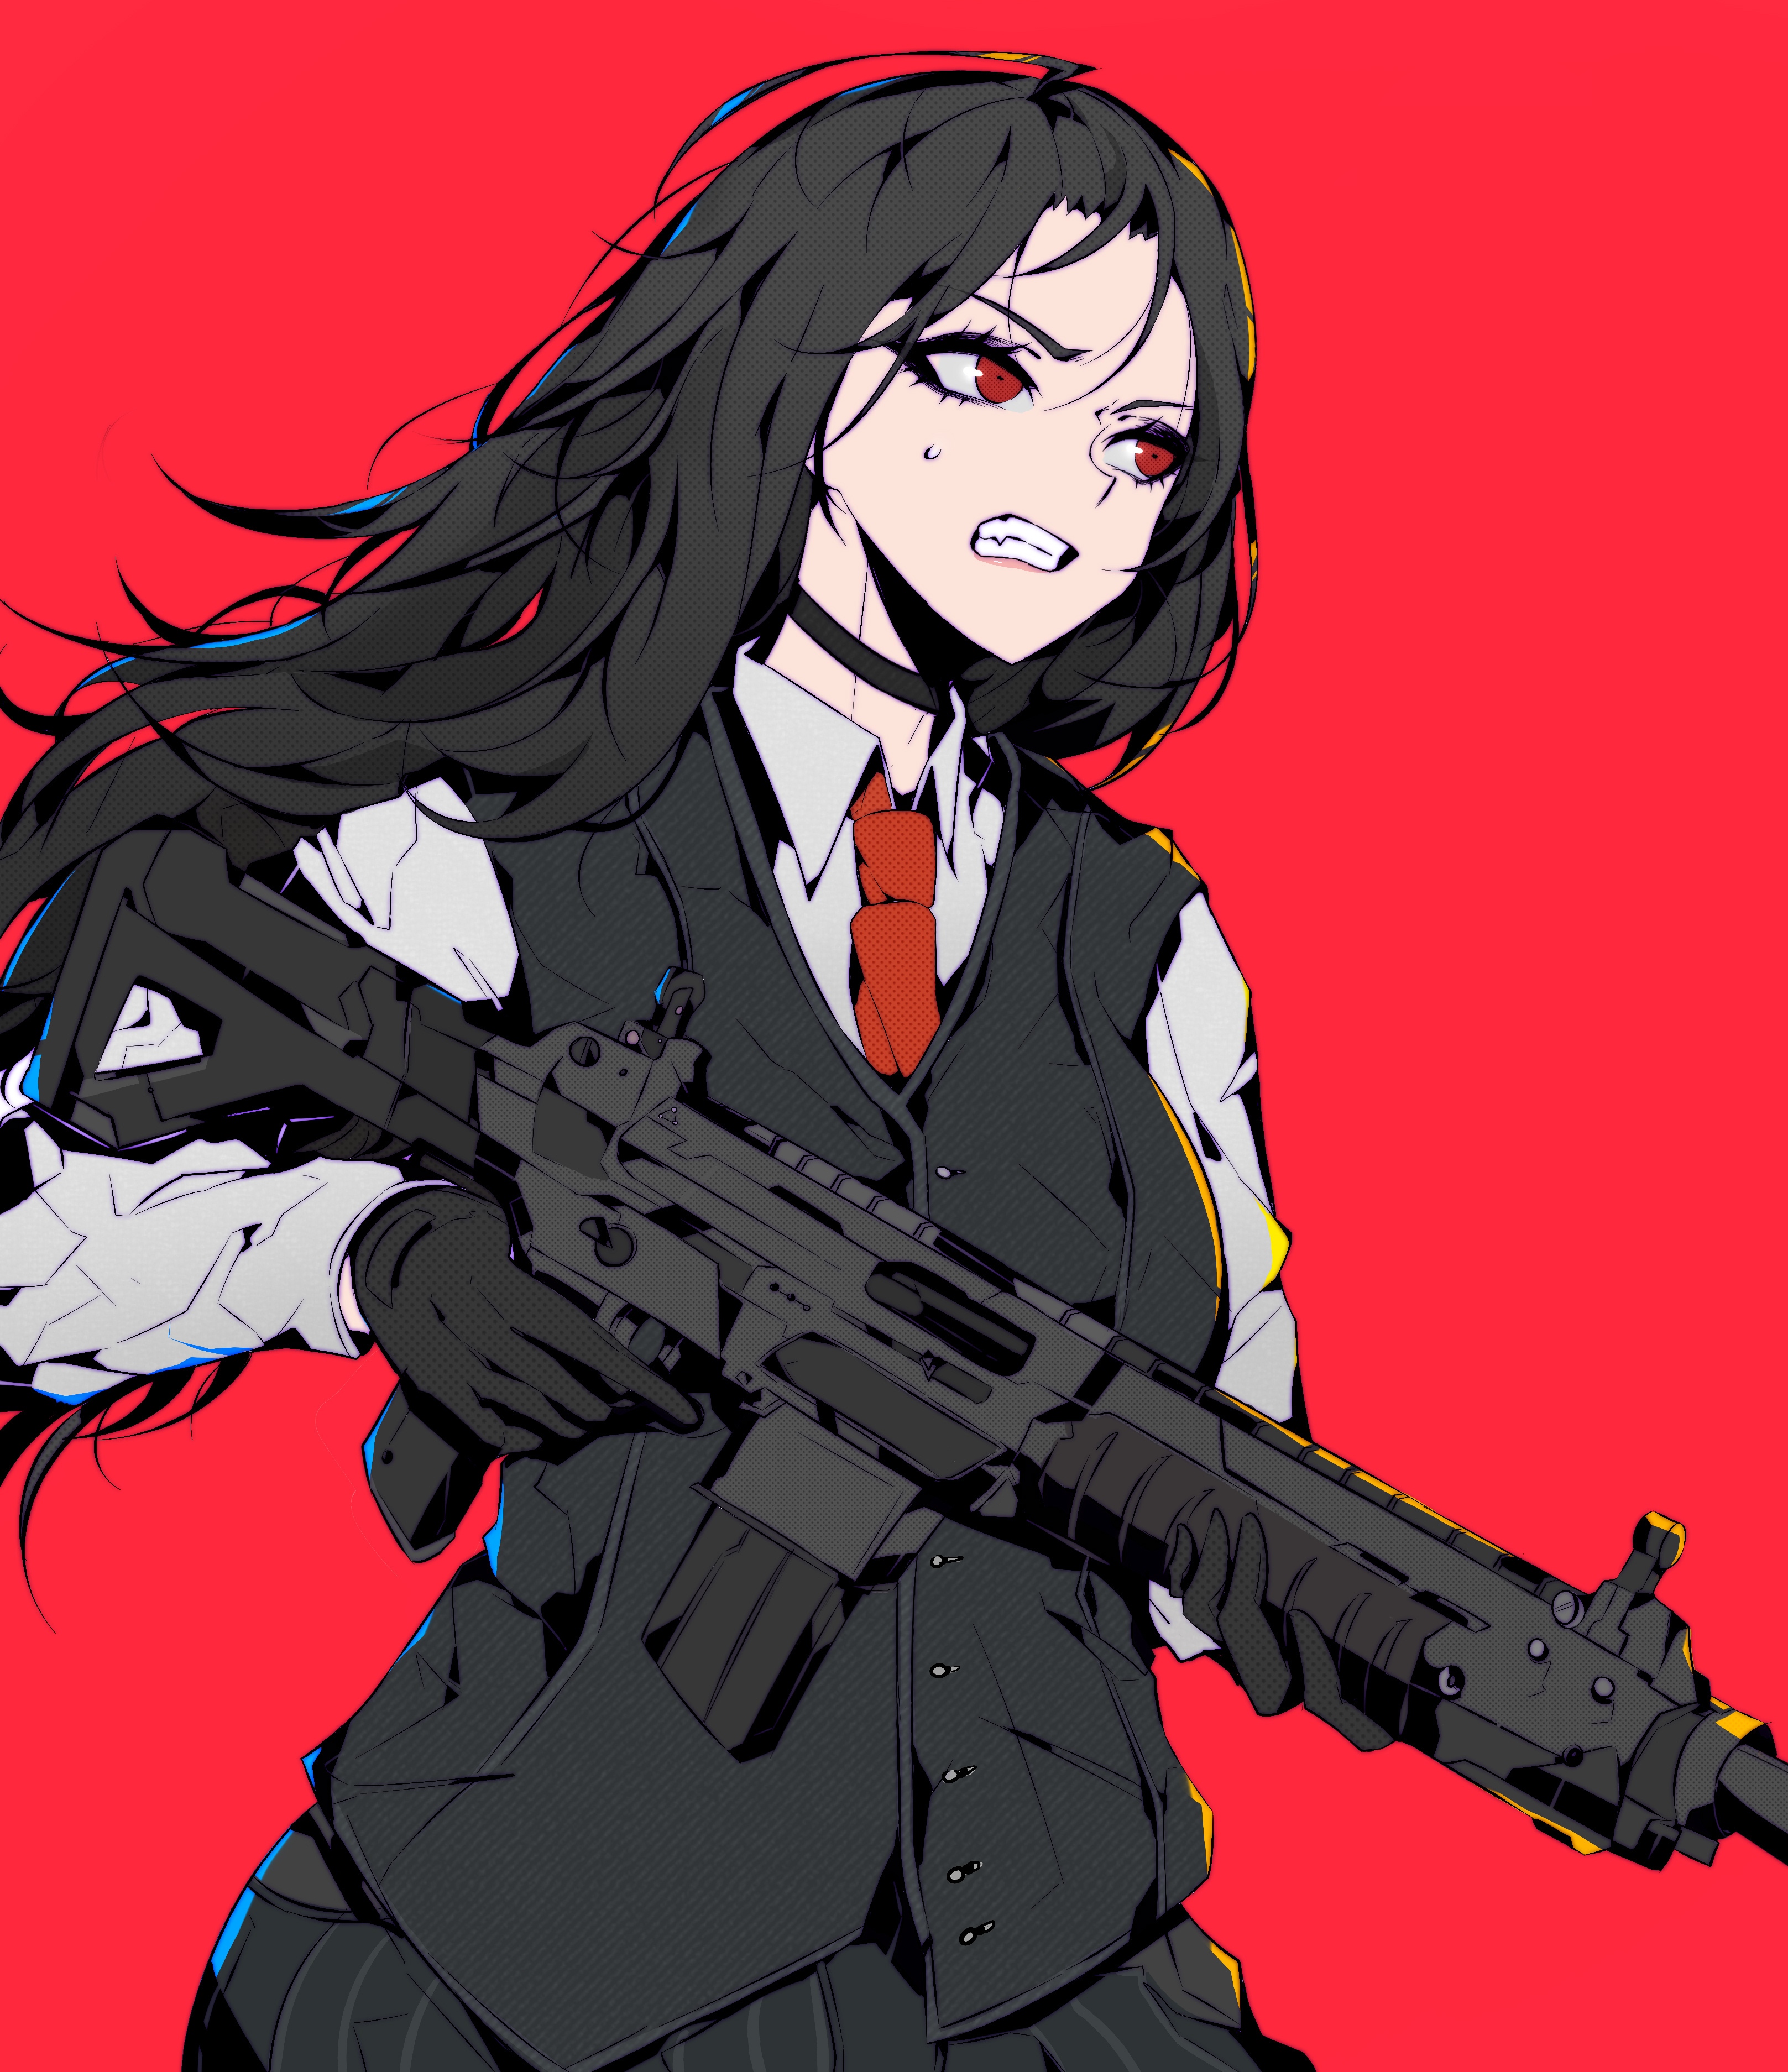 Anime 3234x3748 red eyes red background black hair angry long hair weapon rifles gun red tie white shirt assault rifle anime girls